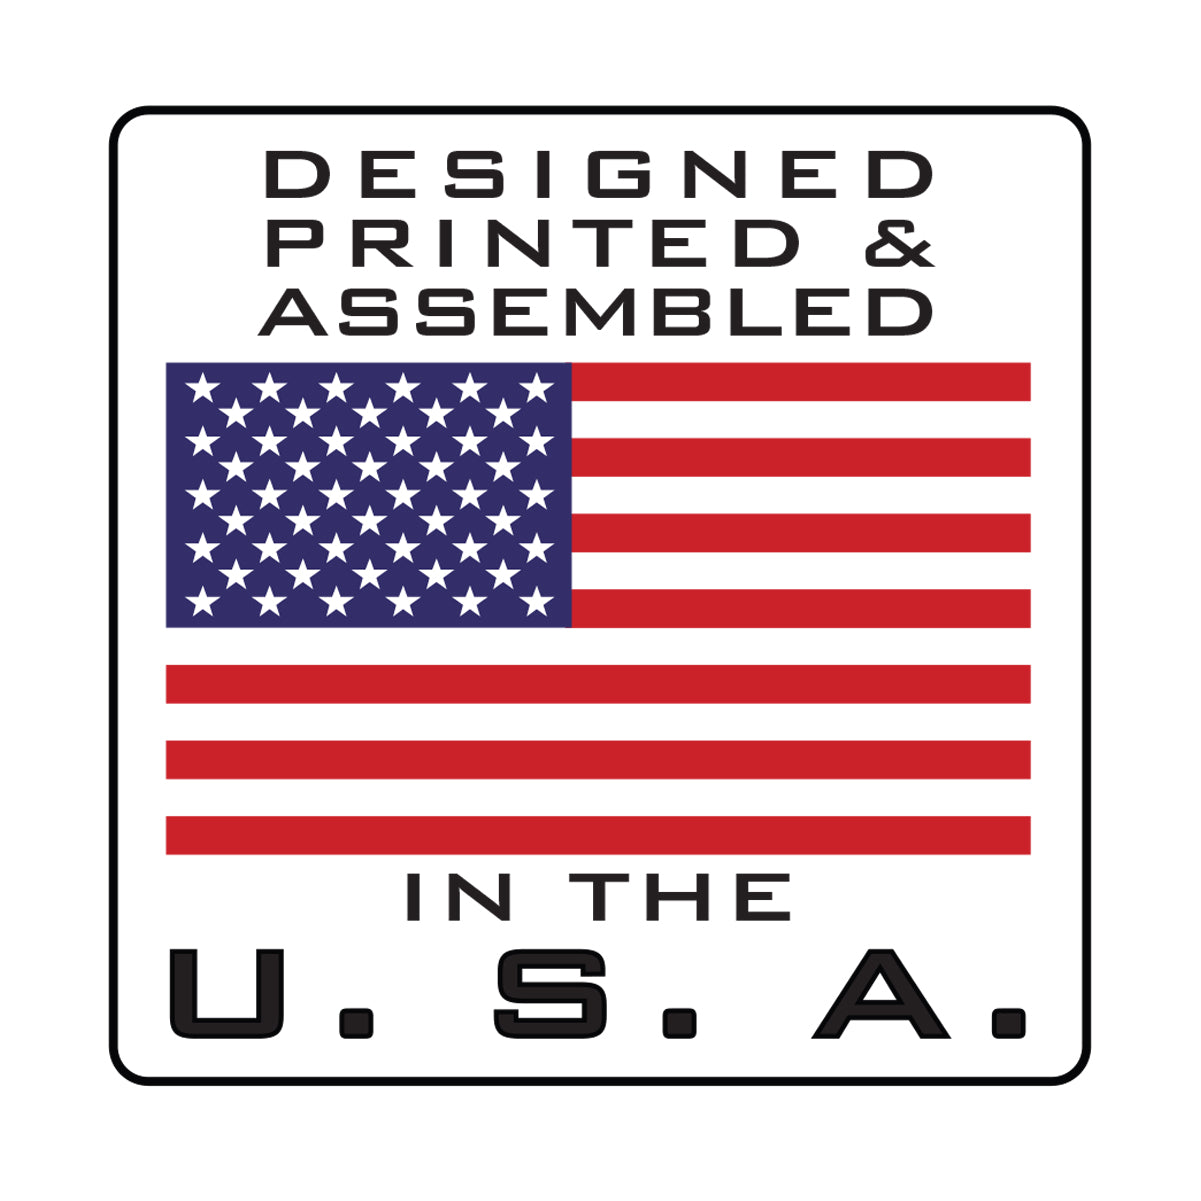 Label featuring the U.S. flag and text stating "Designed, Printed & Assembled in the U.S.A." ensures a durable design suitable for any clinical environment for the Oversized STUDENT NURSE Badge Buddy - XL Badge Backer for Student Nurses - Horizontal Hospital ID Badge Buddies.